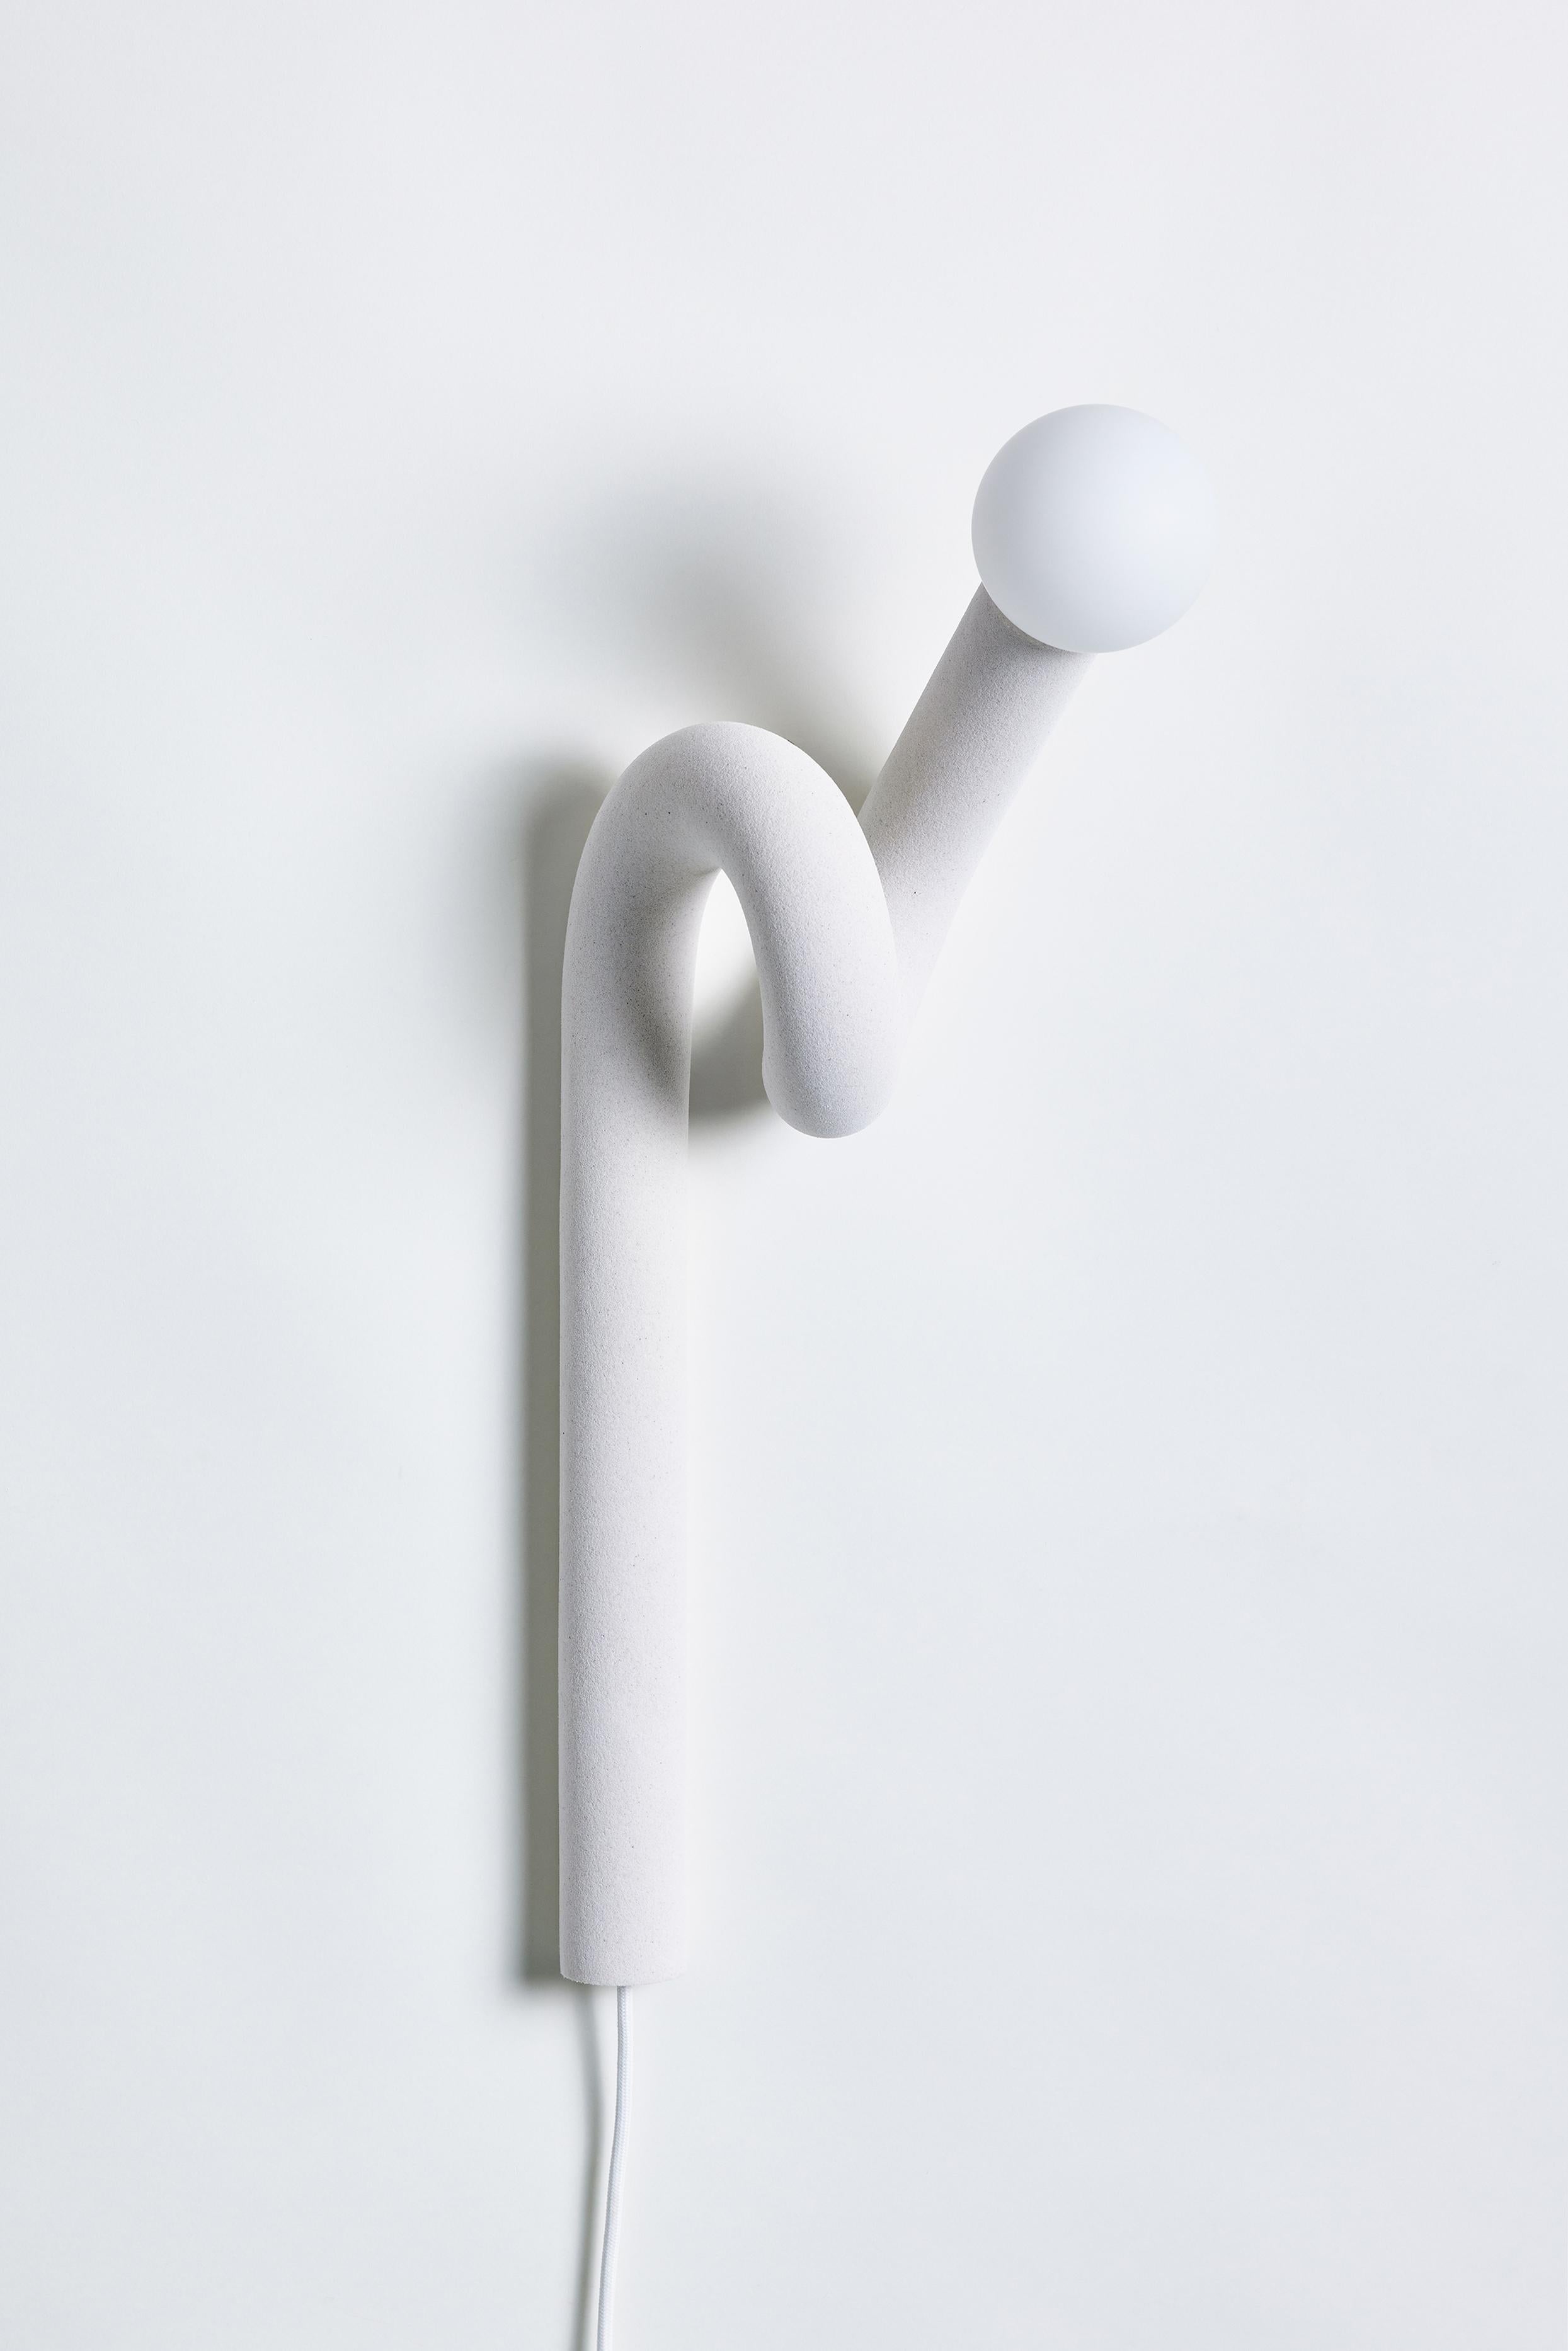 White Hotel Light 11 Wall Light by Hot Wire Extensions
Dimensions: D 30 x W 34 x H 197 cm 
Materials: Waste nylon powder, locally sourced natural white marble sand, copper pipe, hand-blown glass bulb, natural cotton electrical.
3 kg

Also available